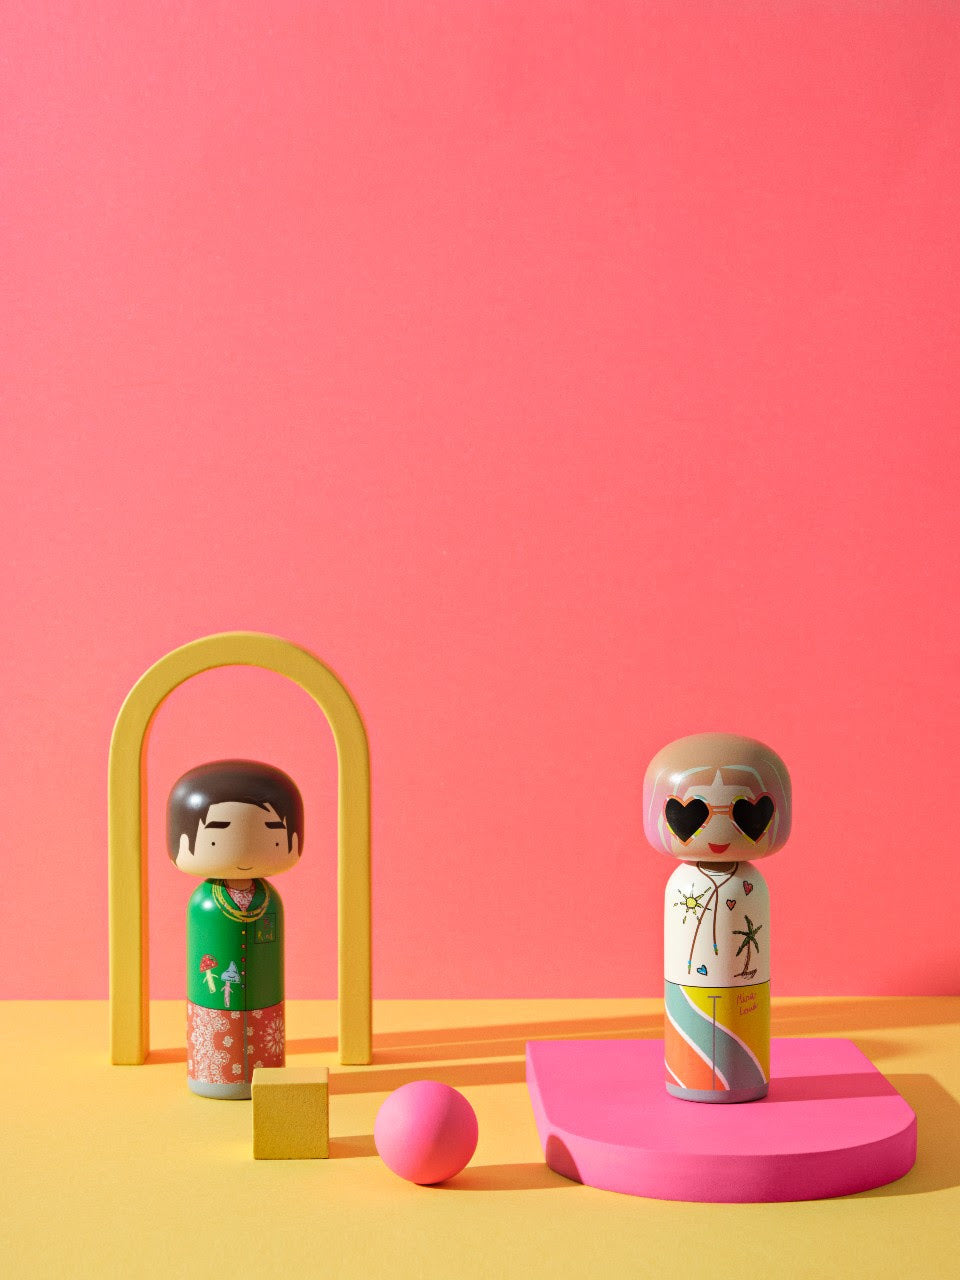 Kokeshi Doll by Sketch.Inc for Lucie Kaas - Mira Mikati